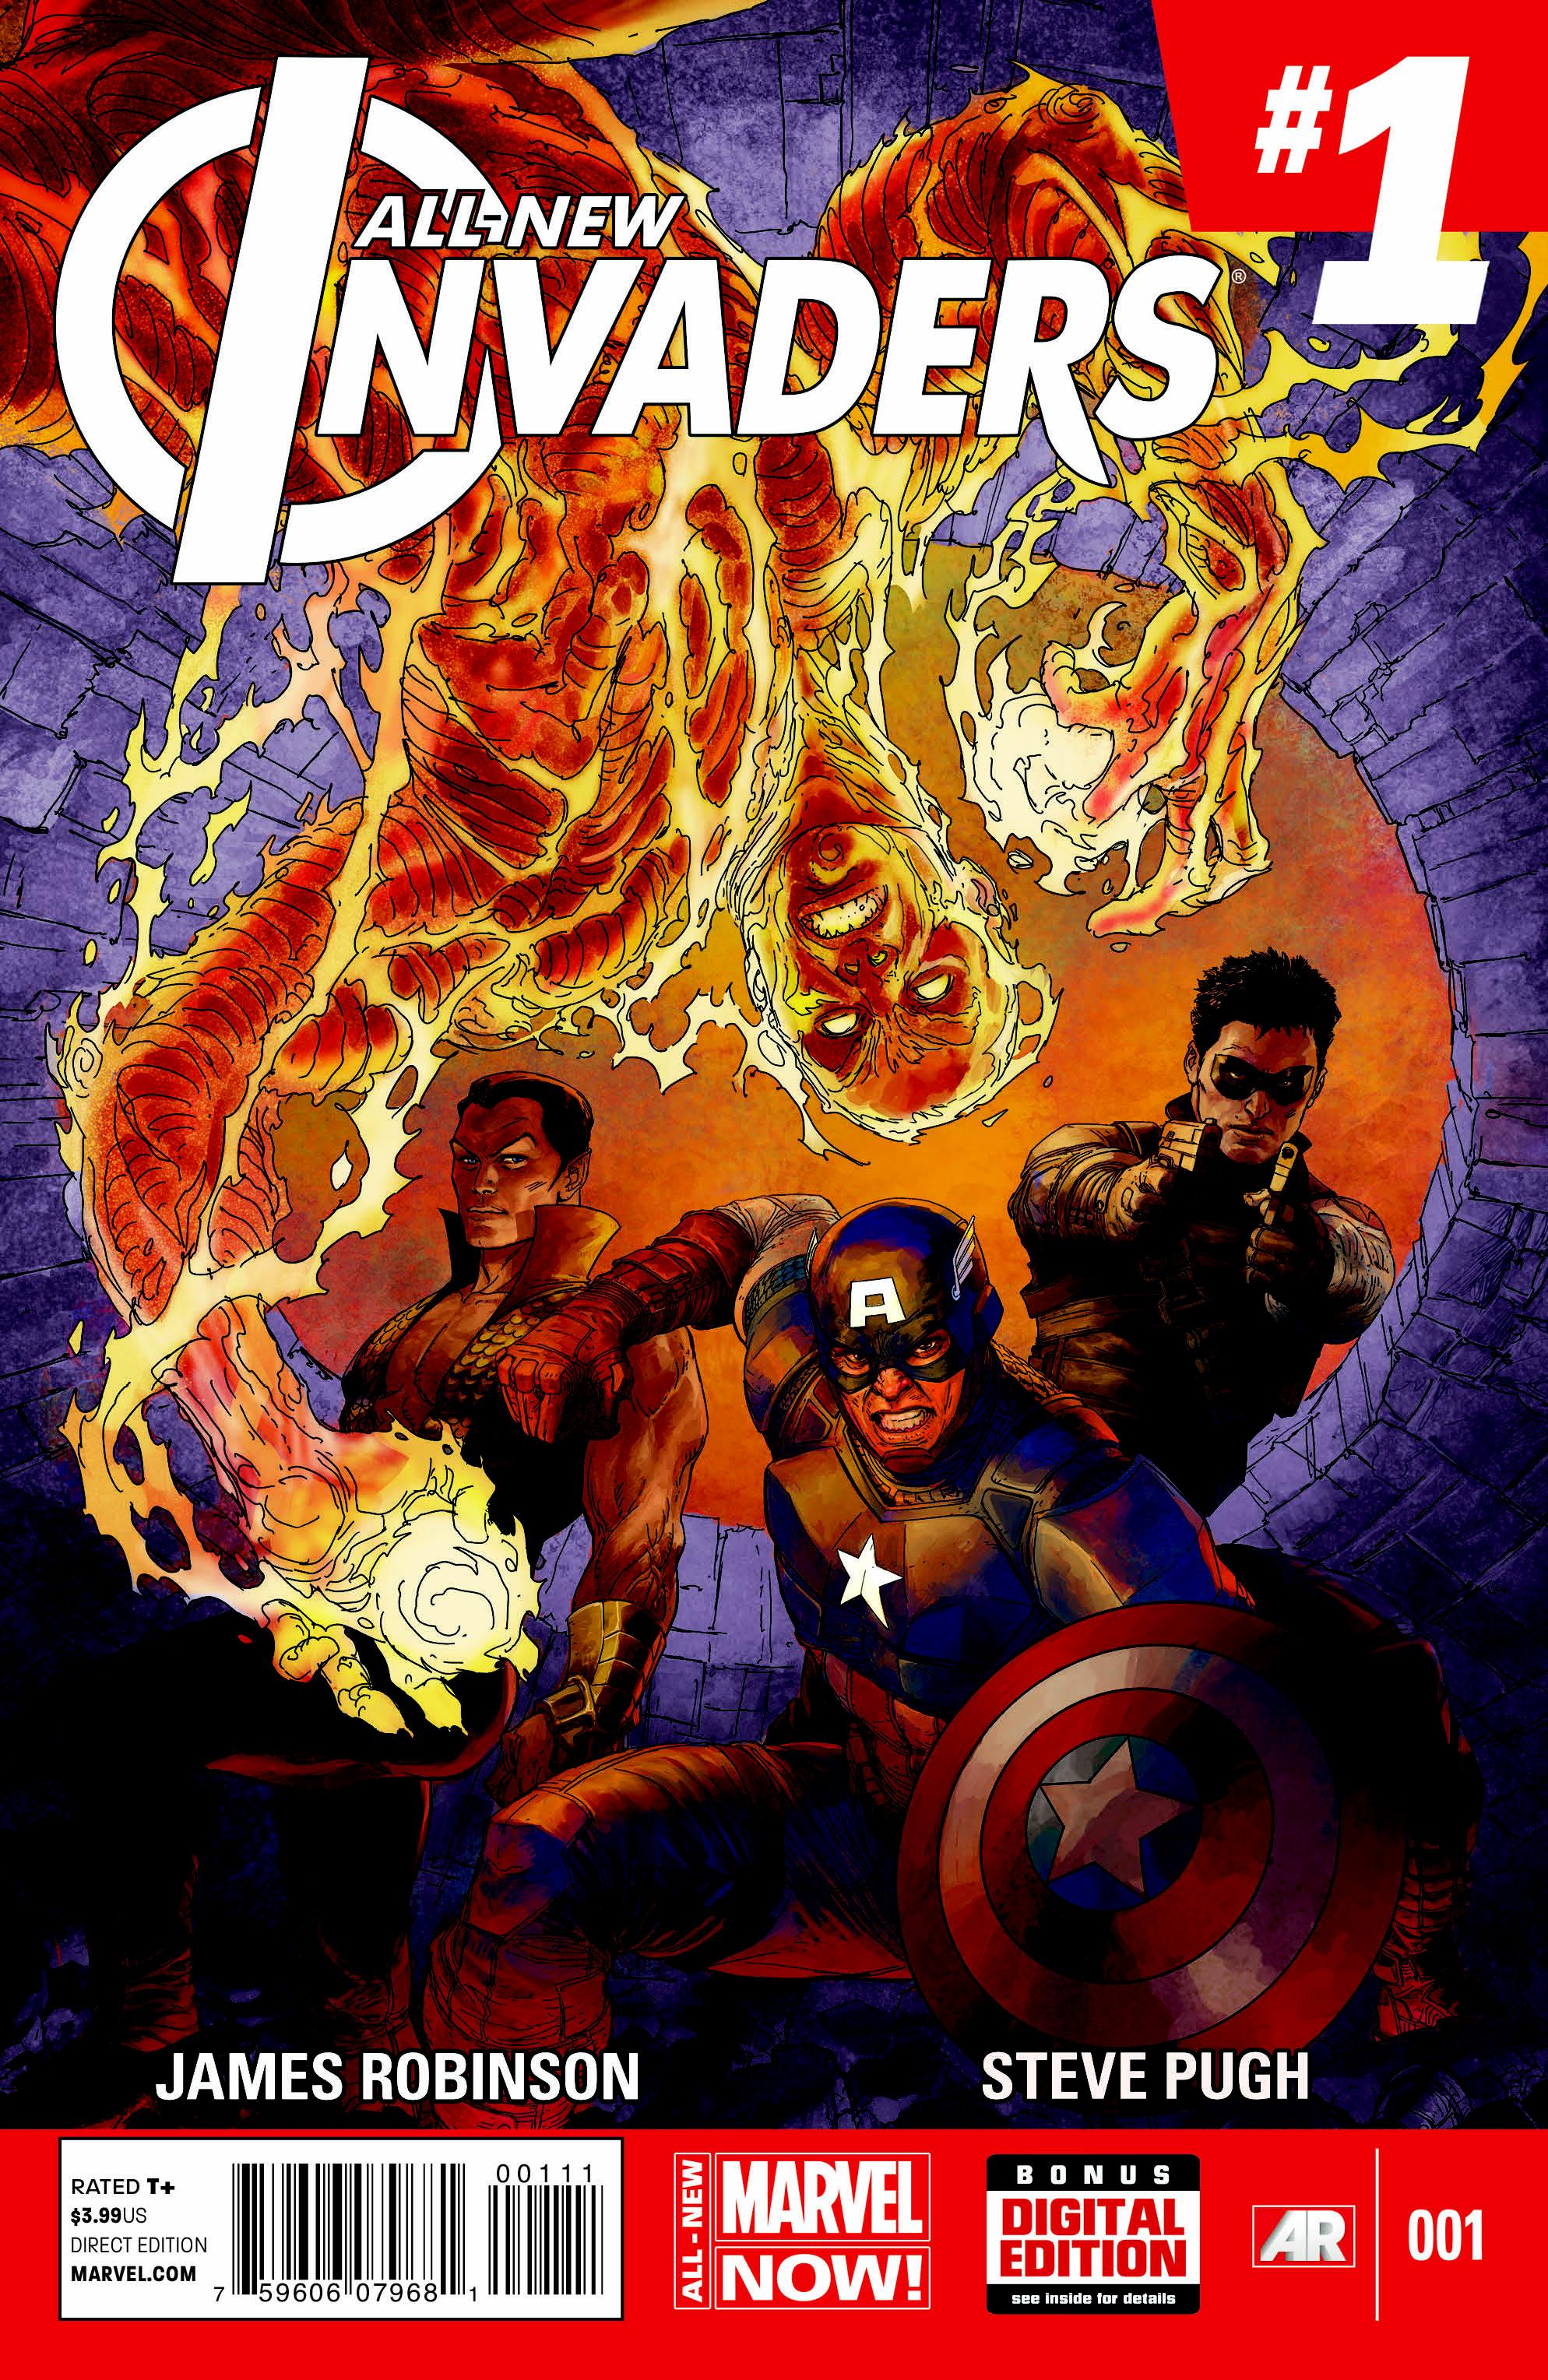 All-New Invaders Vol. 1 #1